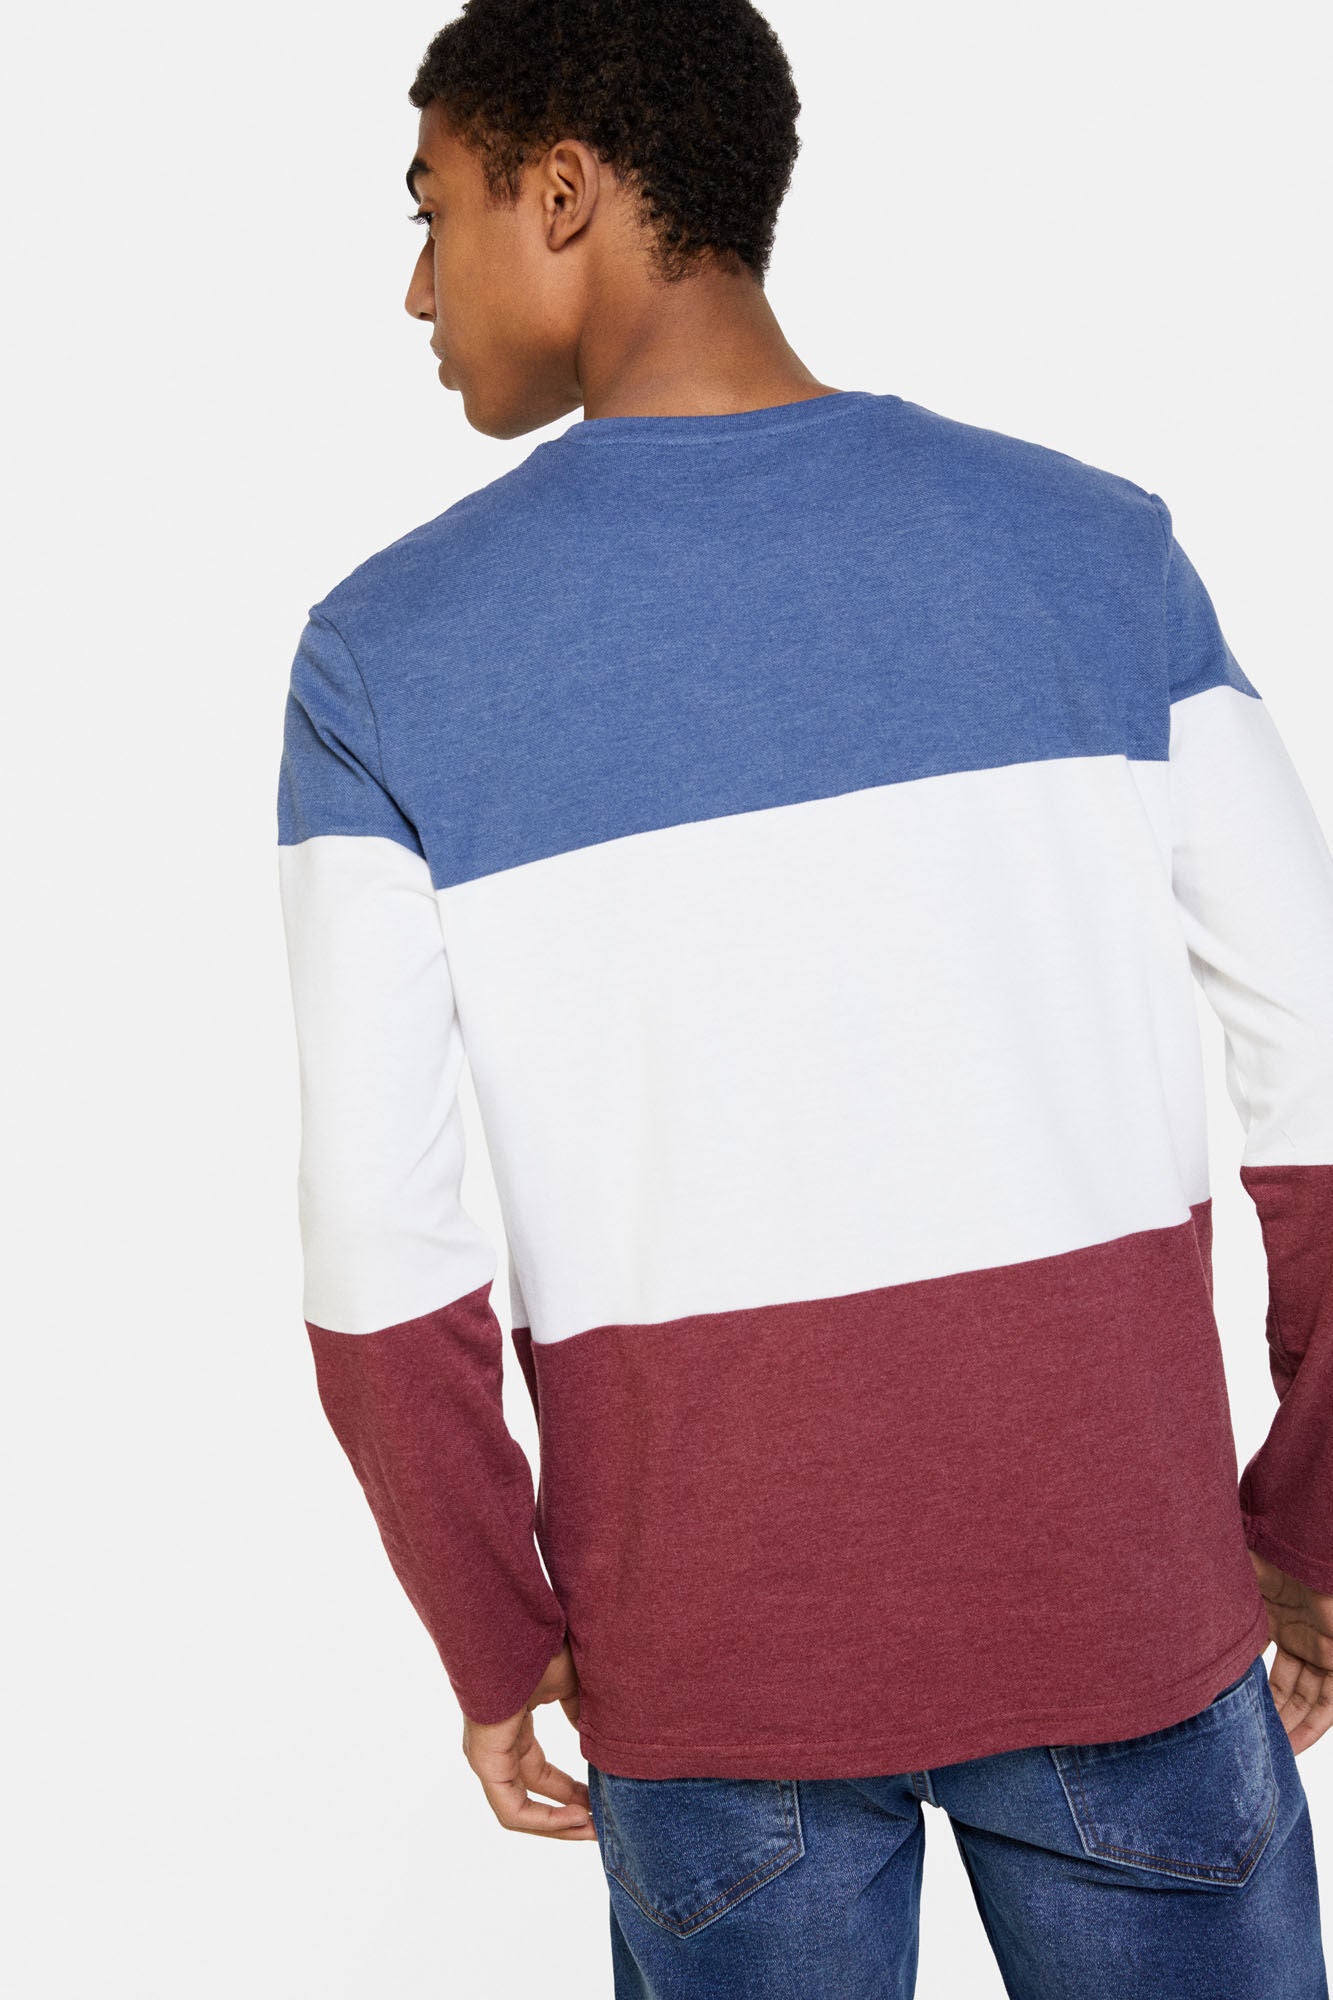 Long-sleeved tricolour top